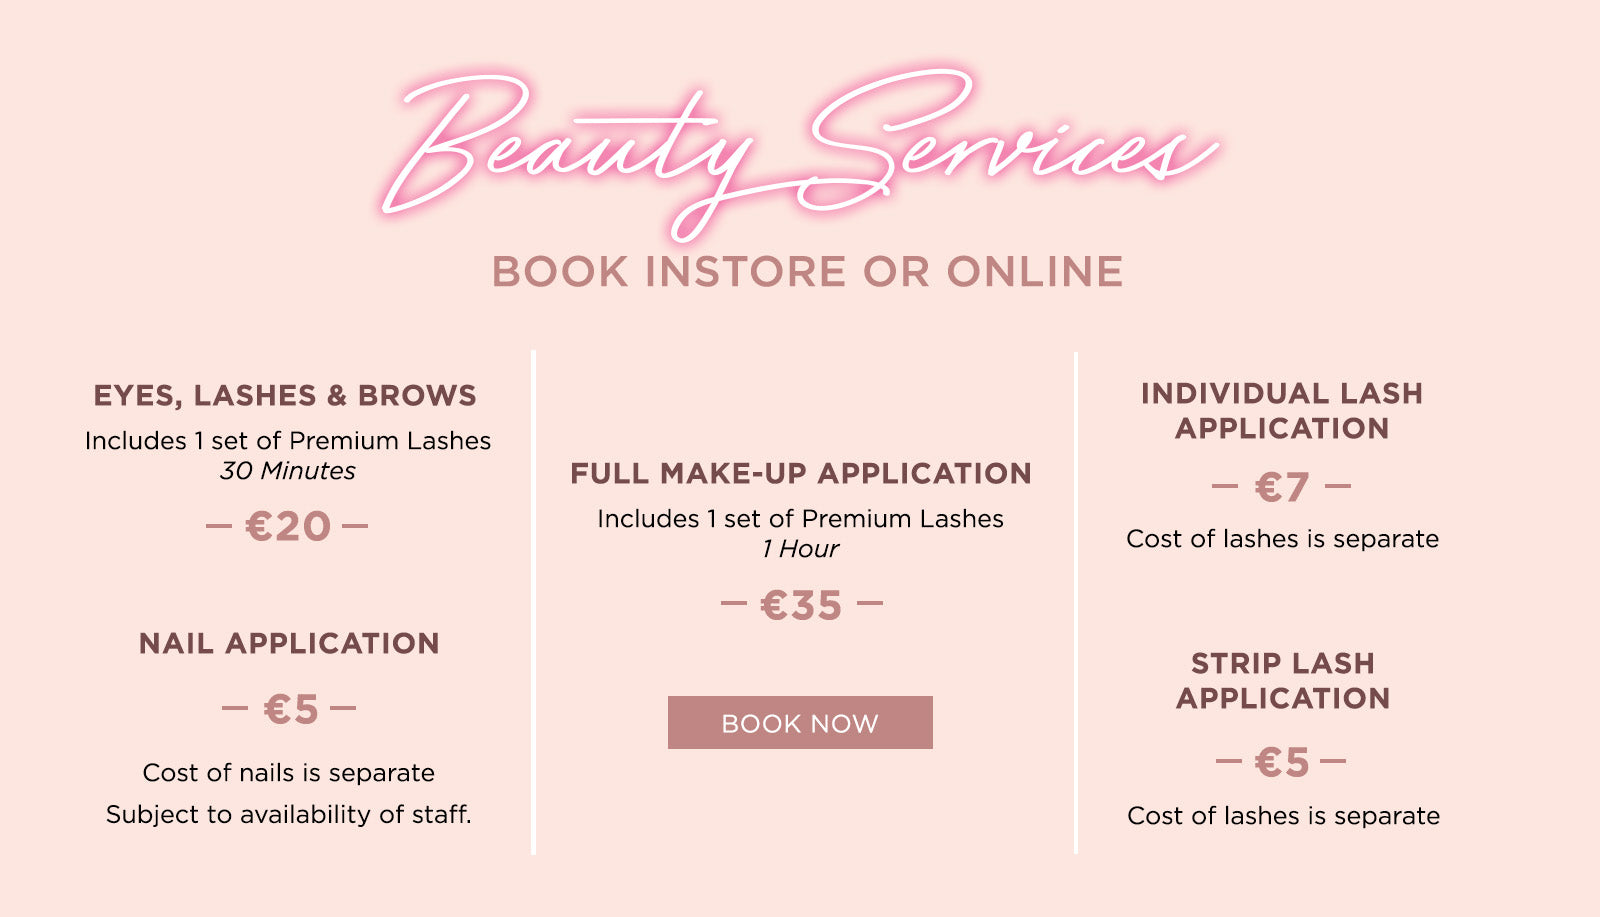 Appointment Booking - Dundrum